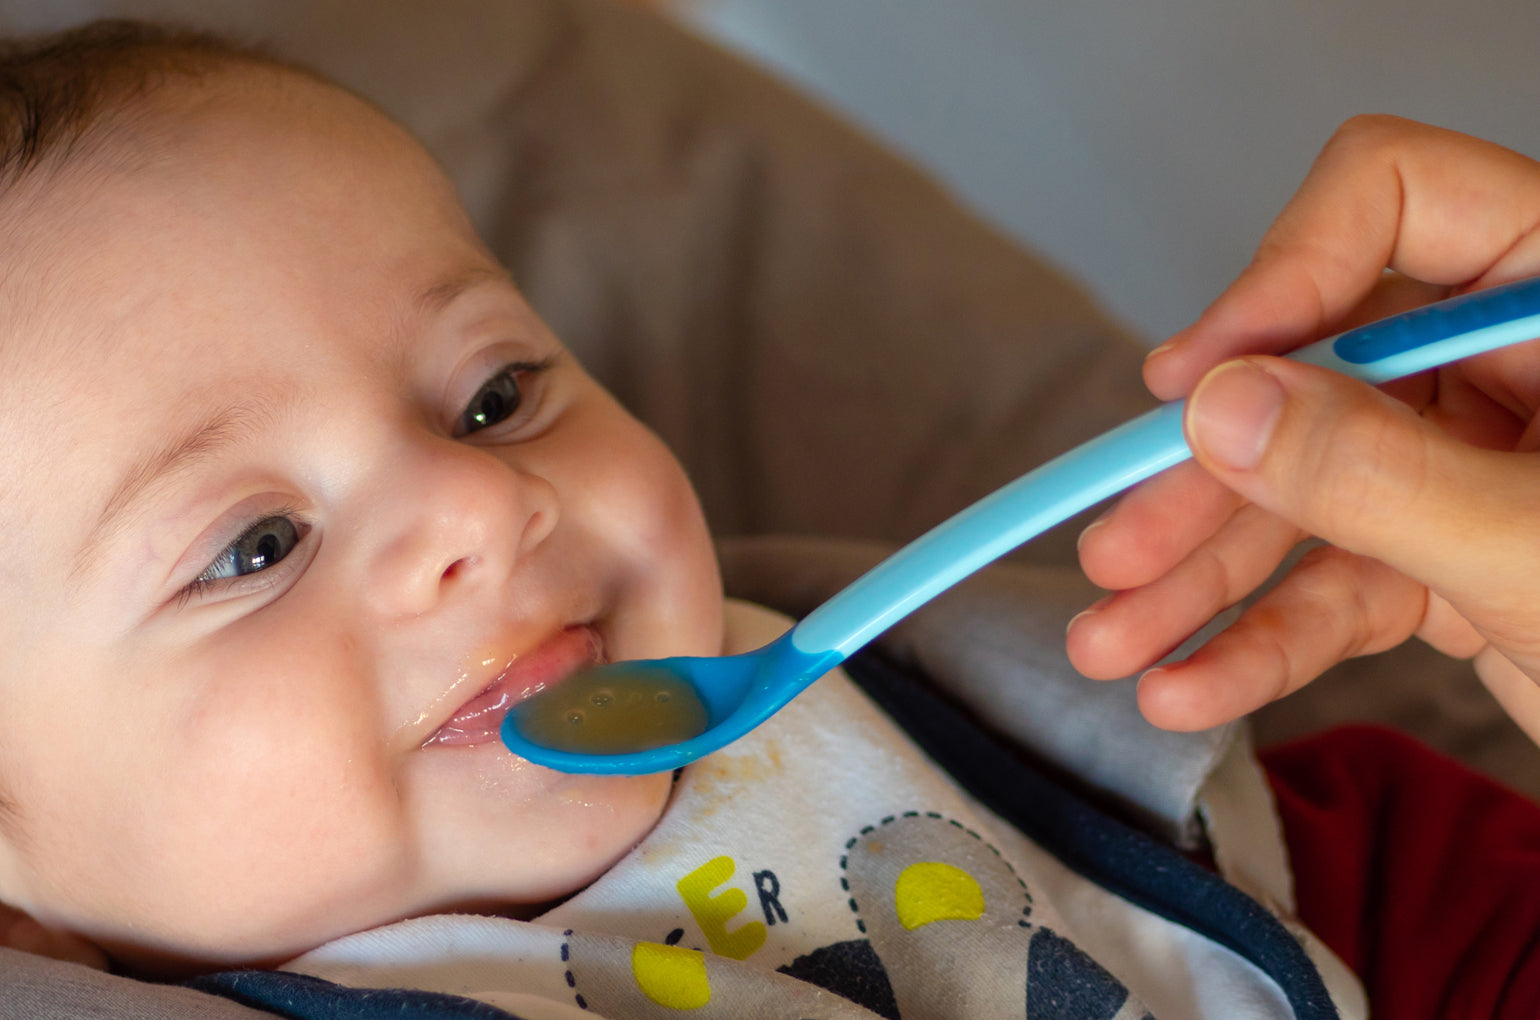 Spot the Clues: Signs Your Baby is Ready for Weaning